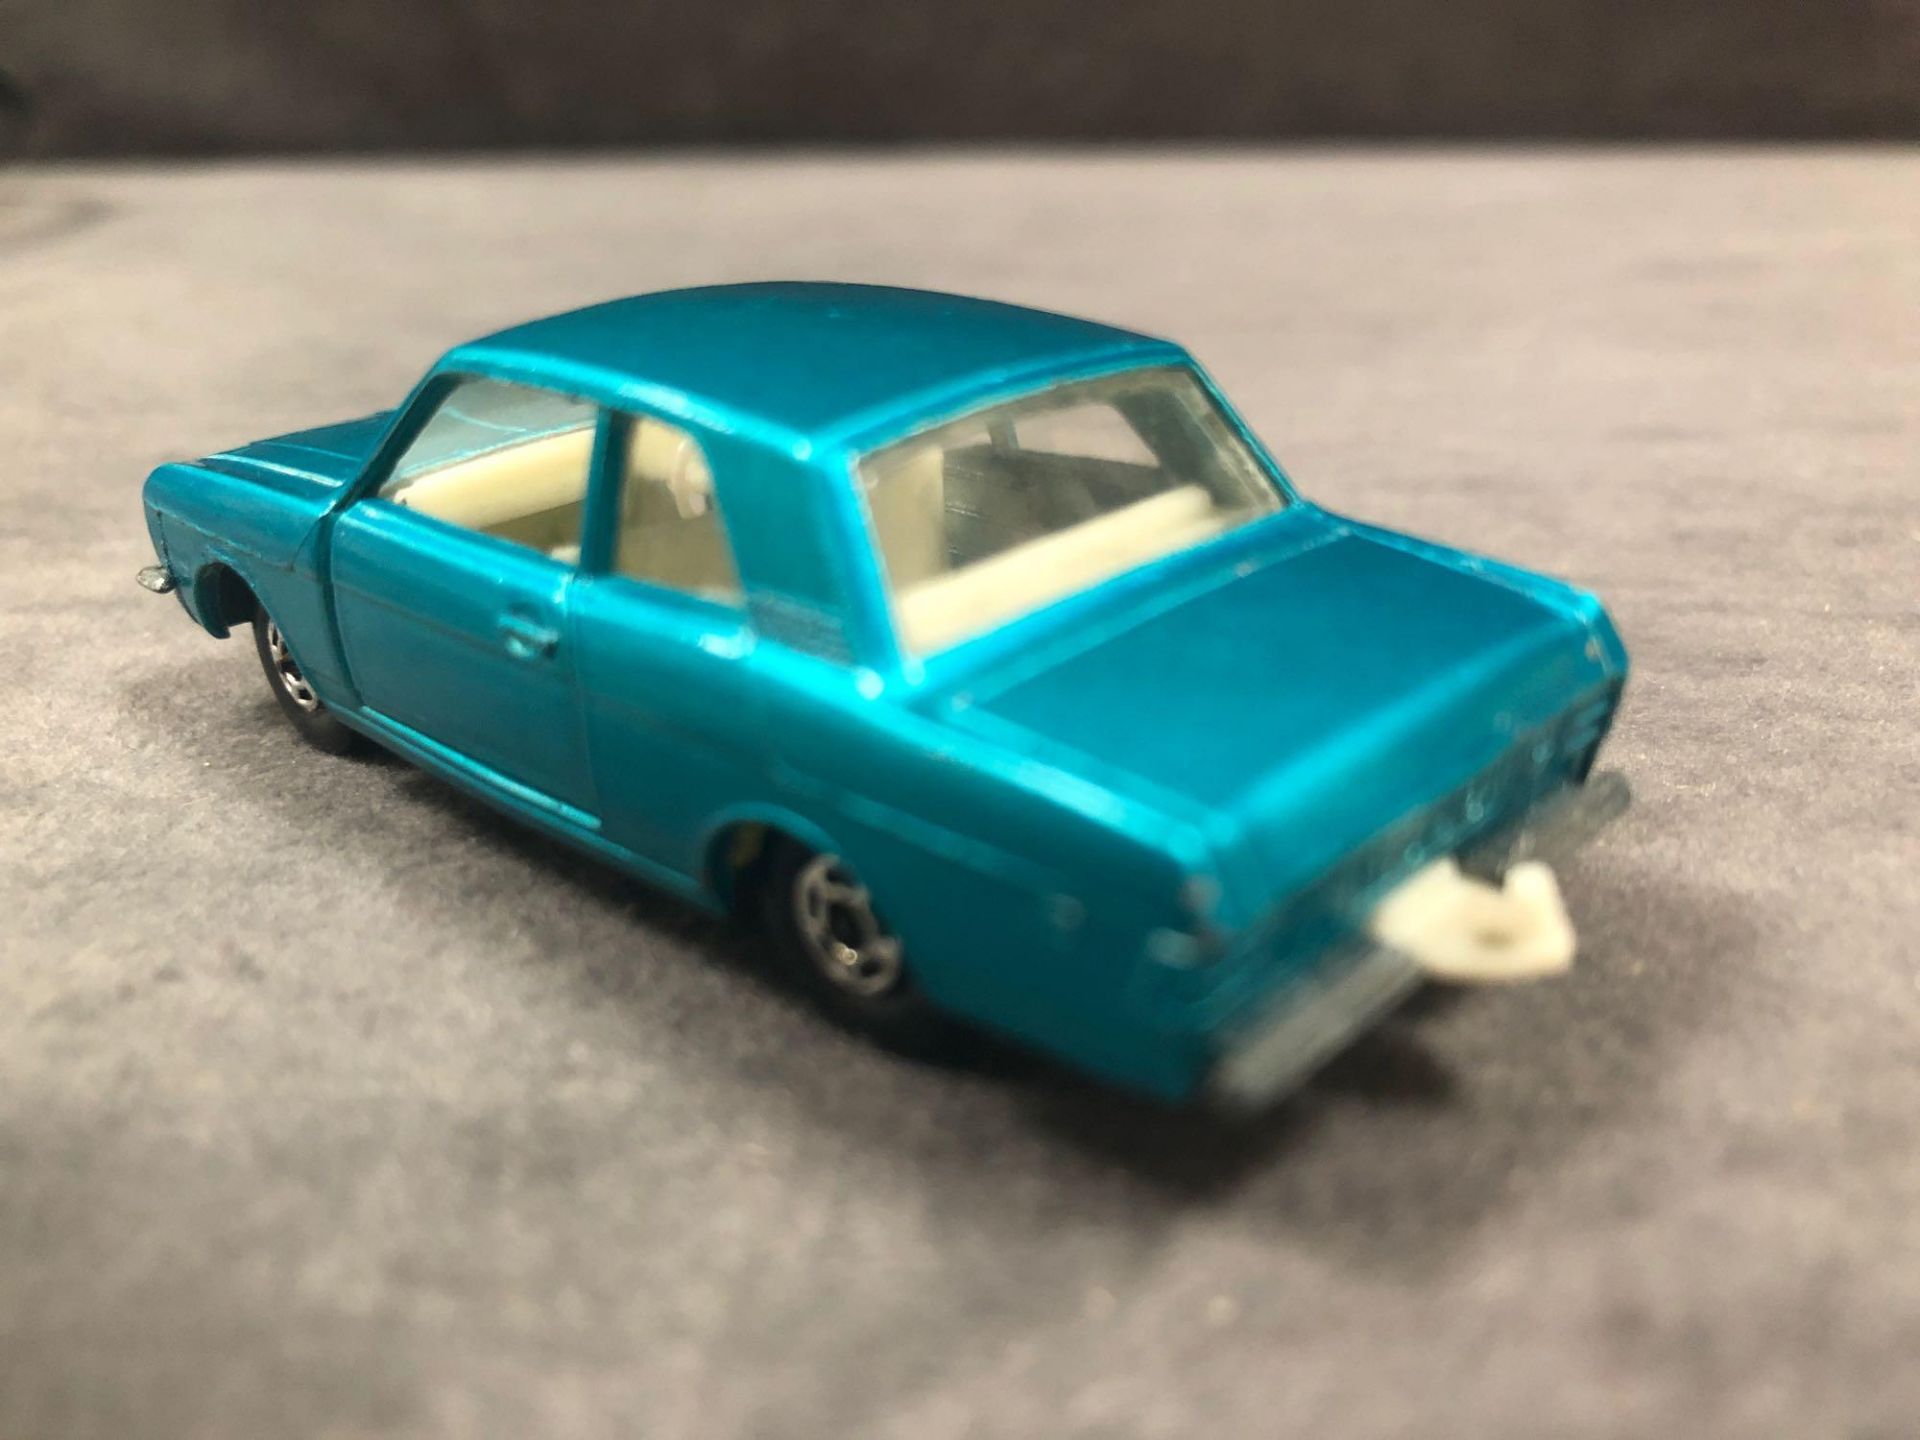 Mint Matchbox Superfast Diecast #25 Ford Cortina GT In Metallic Blue With In Crisp Box - Image 3 of 3